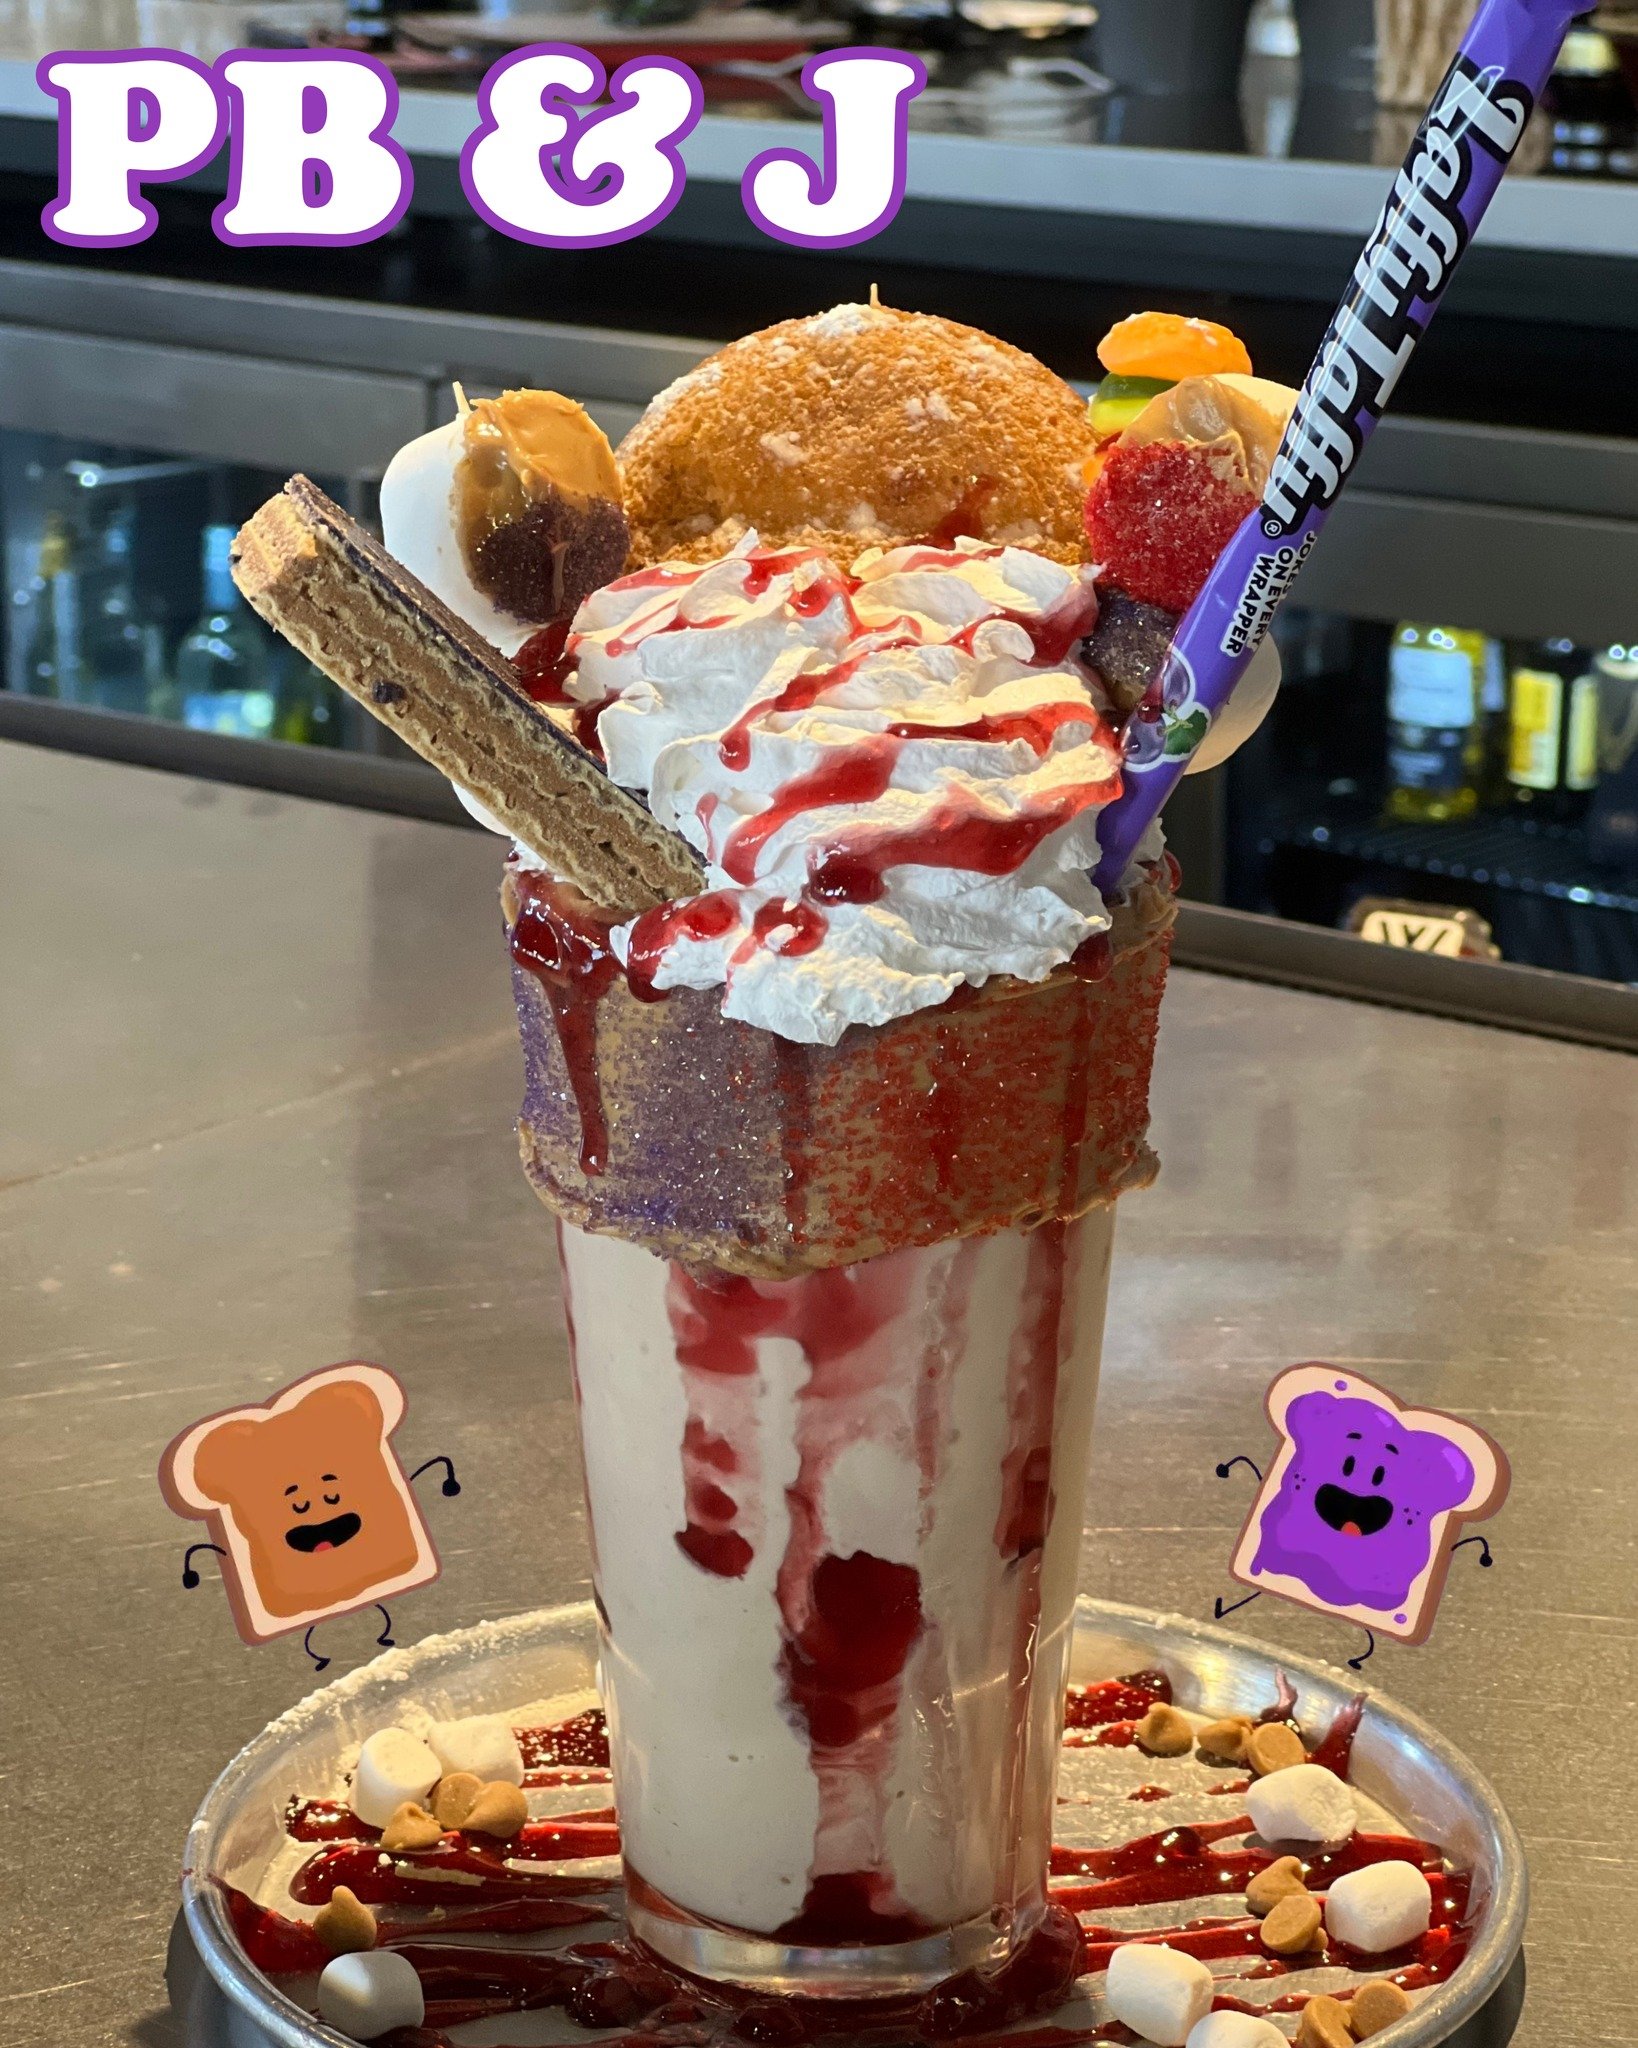 It's &quot;Peanut Butter Jelly Time&quot; shake!🥜🍇

Classic flavors meet a delicious twist! Imagine indulging in creamy peanut butter vanilla ice cream, complemented by a peanut butter rim that adds an extra layer of nutty goodness.

But that's not